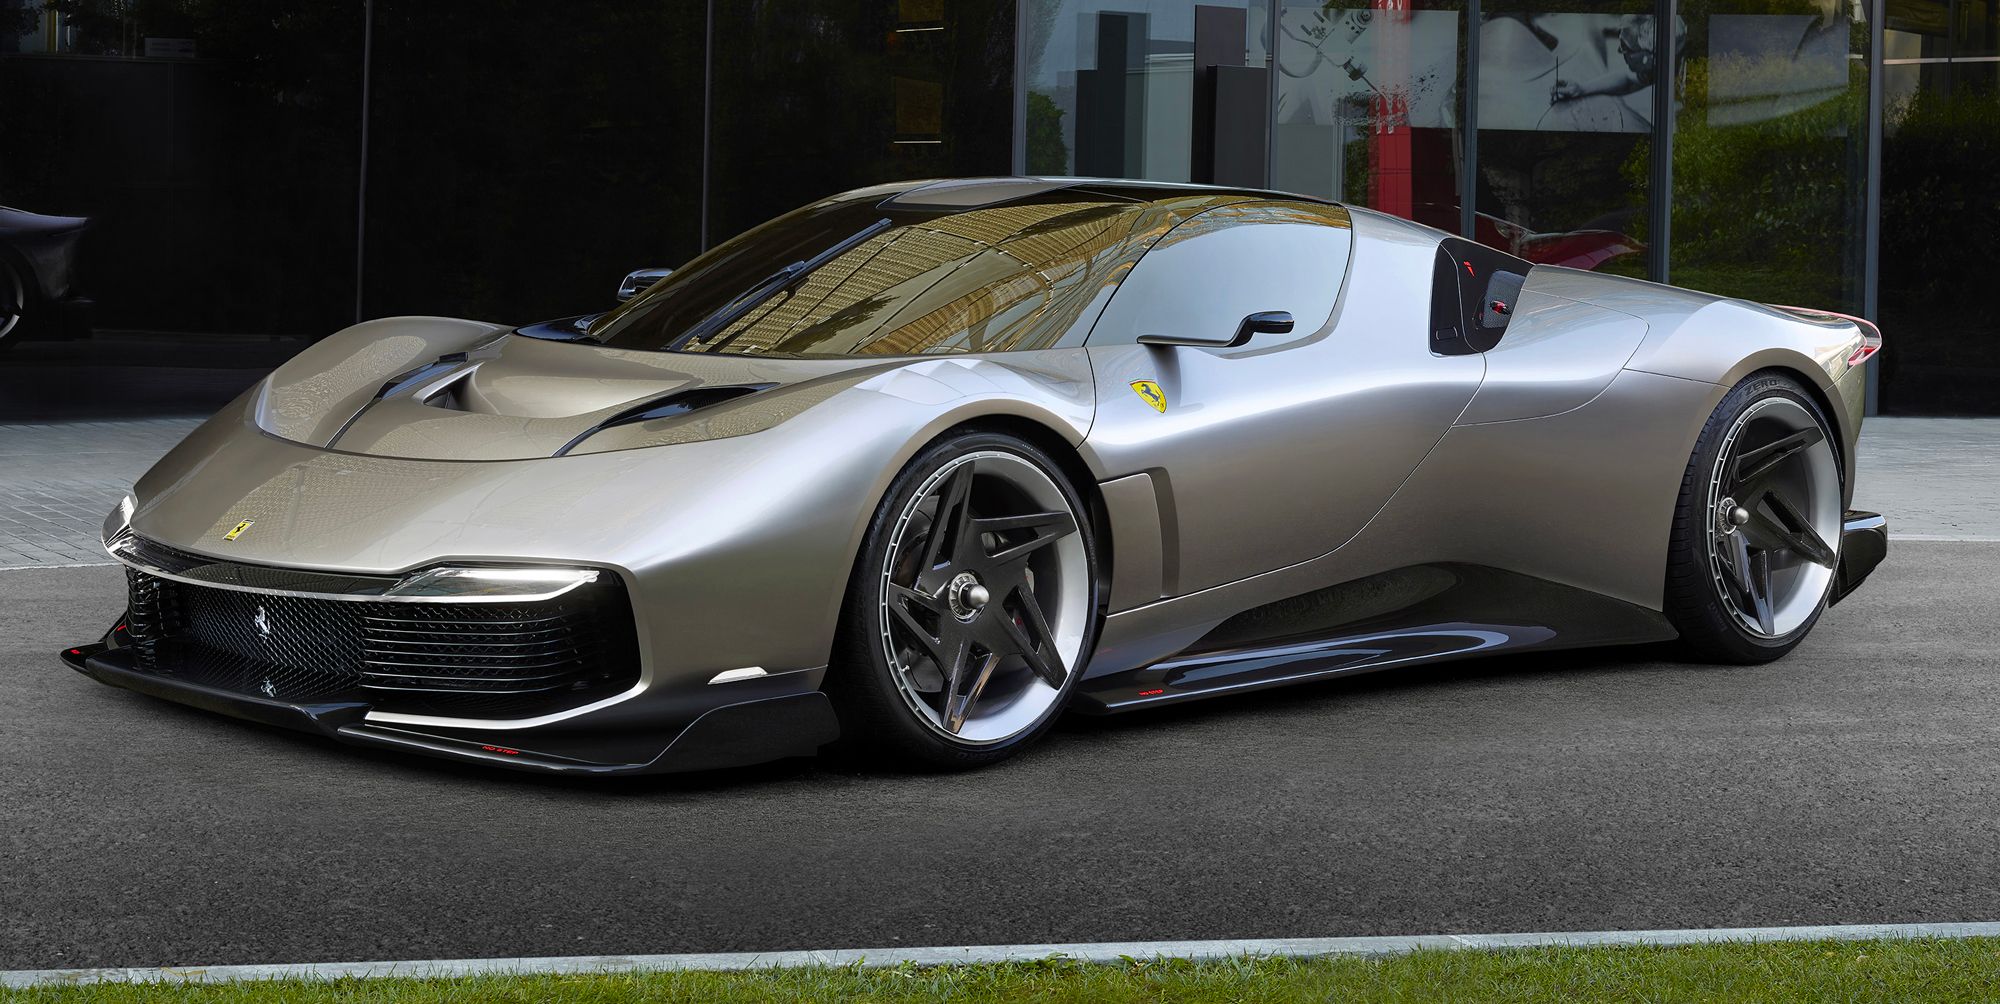 Ferrari KC23 Is a One-Off Track Car Based on the 488 GT3 Evo